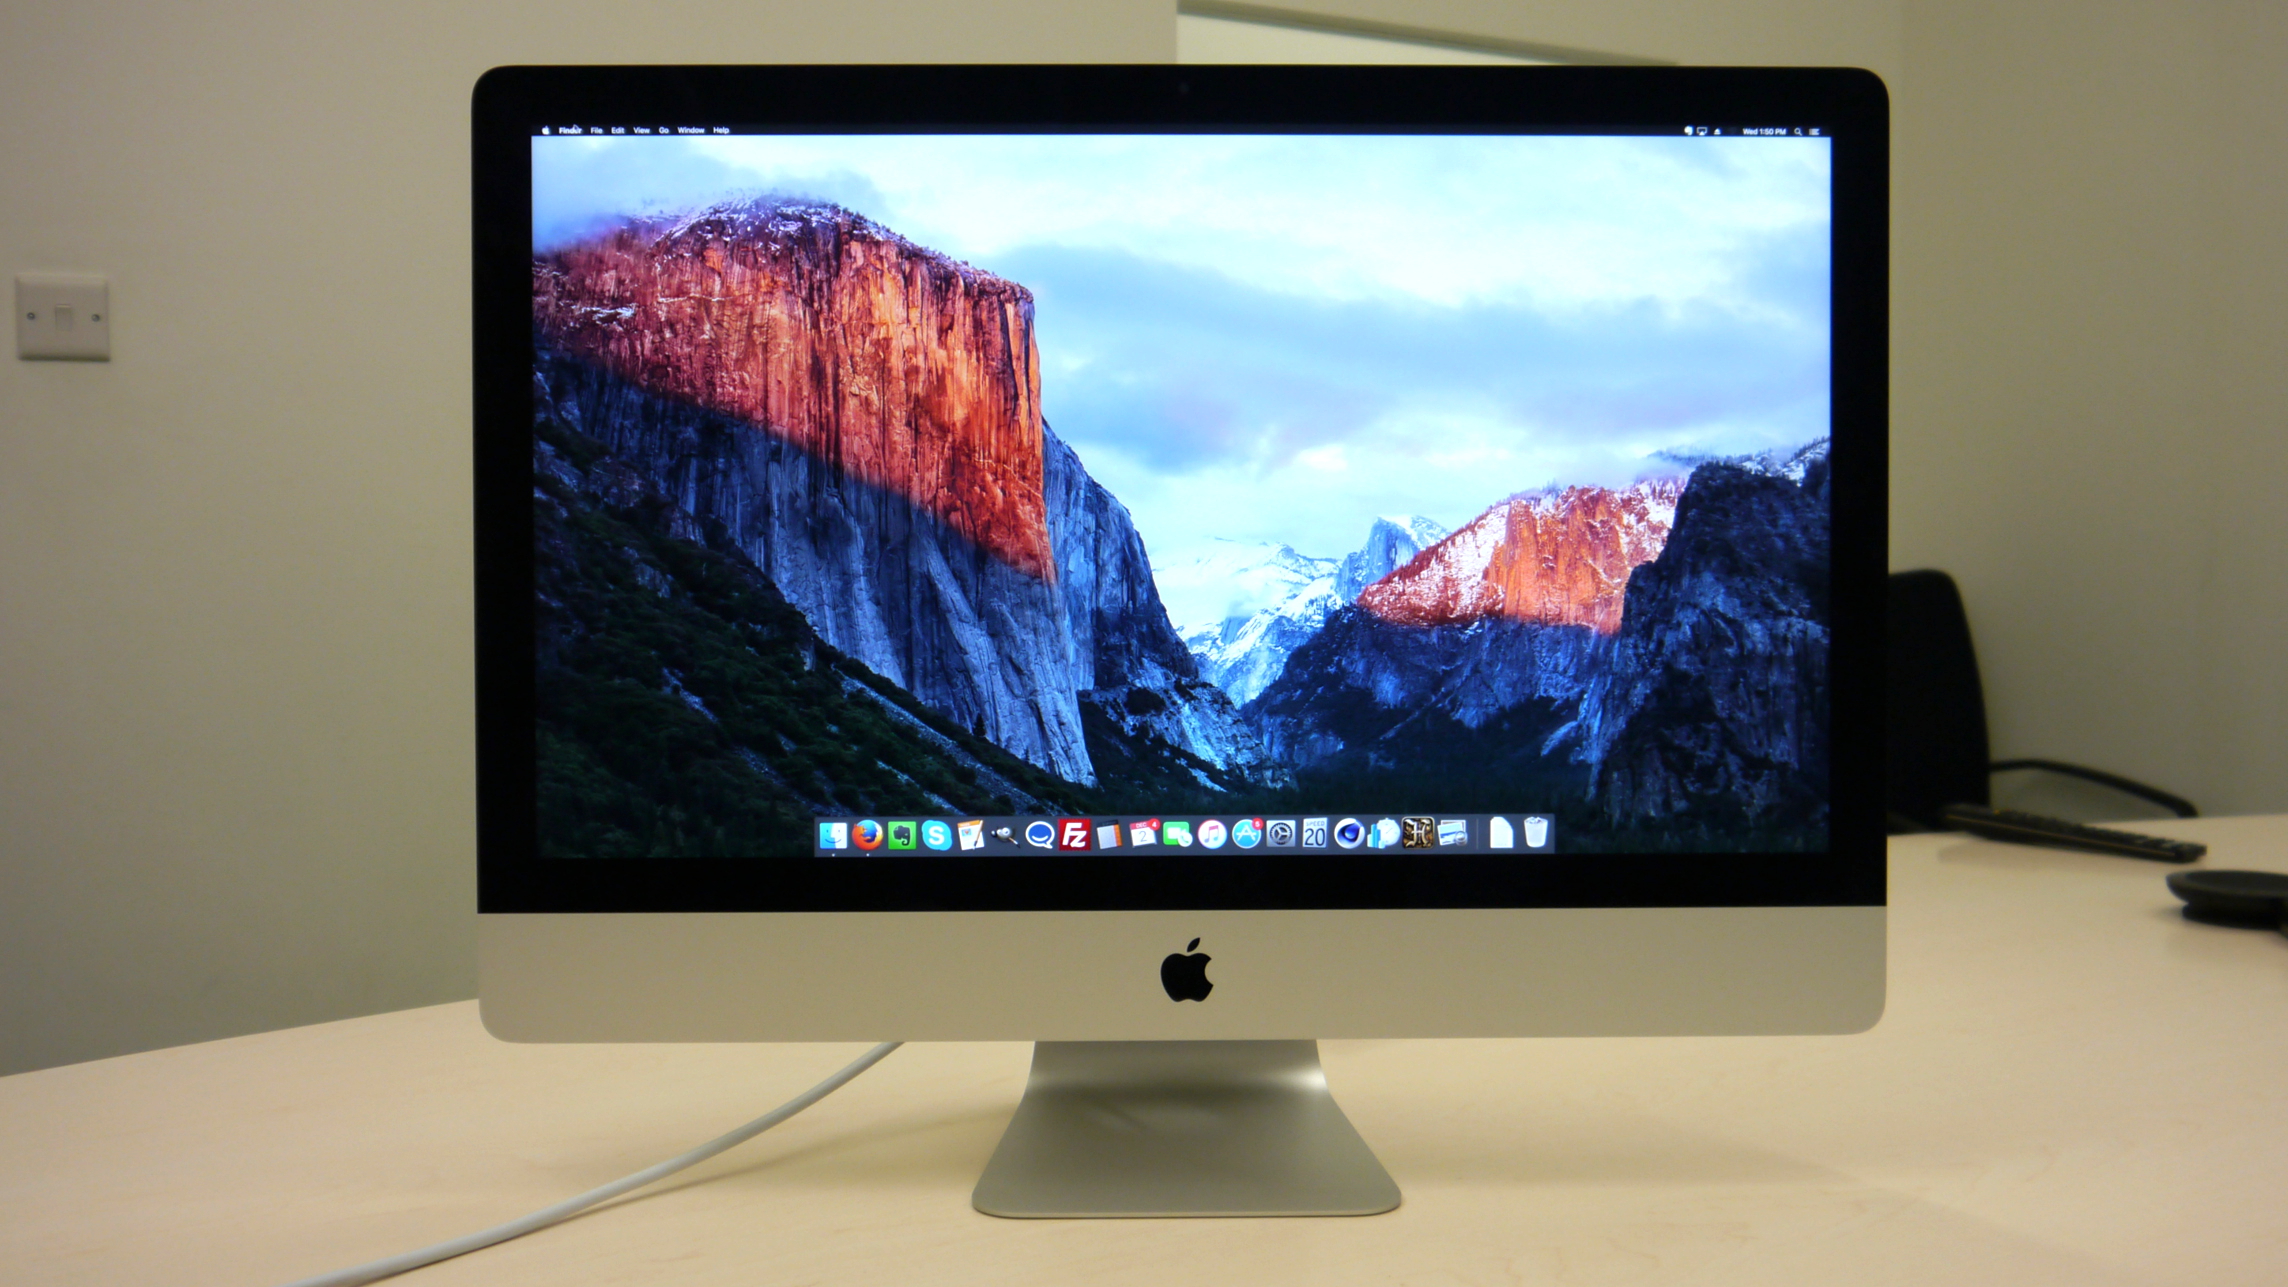 Specifications and performance - Apple iMac with 5K Retina display 